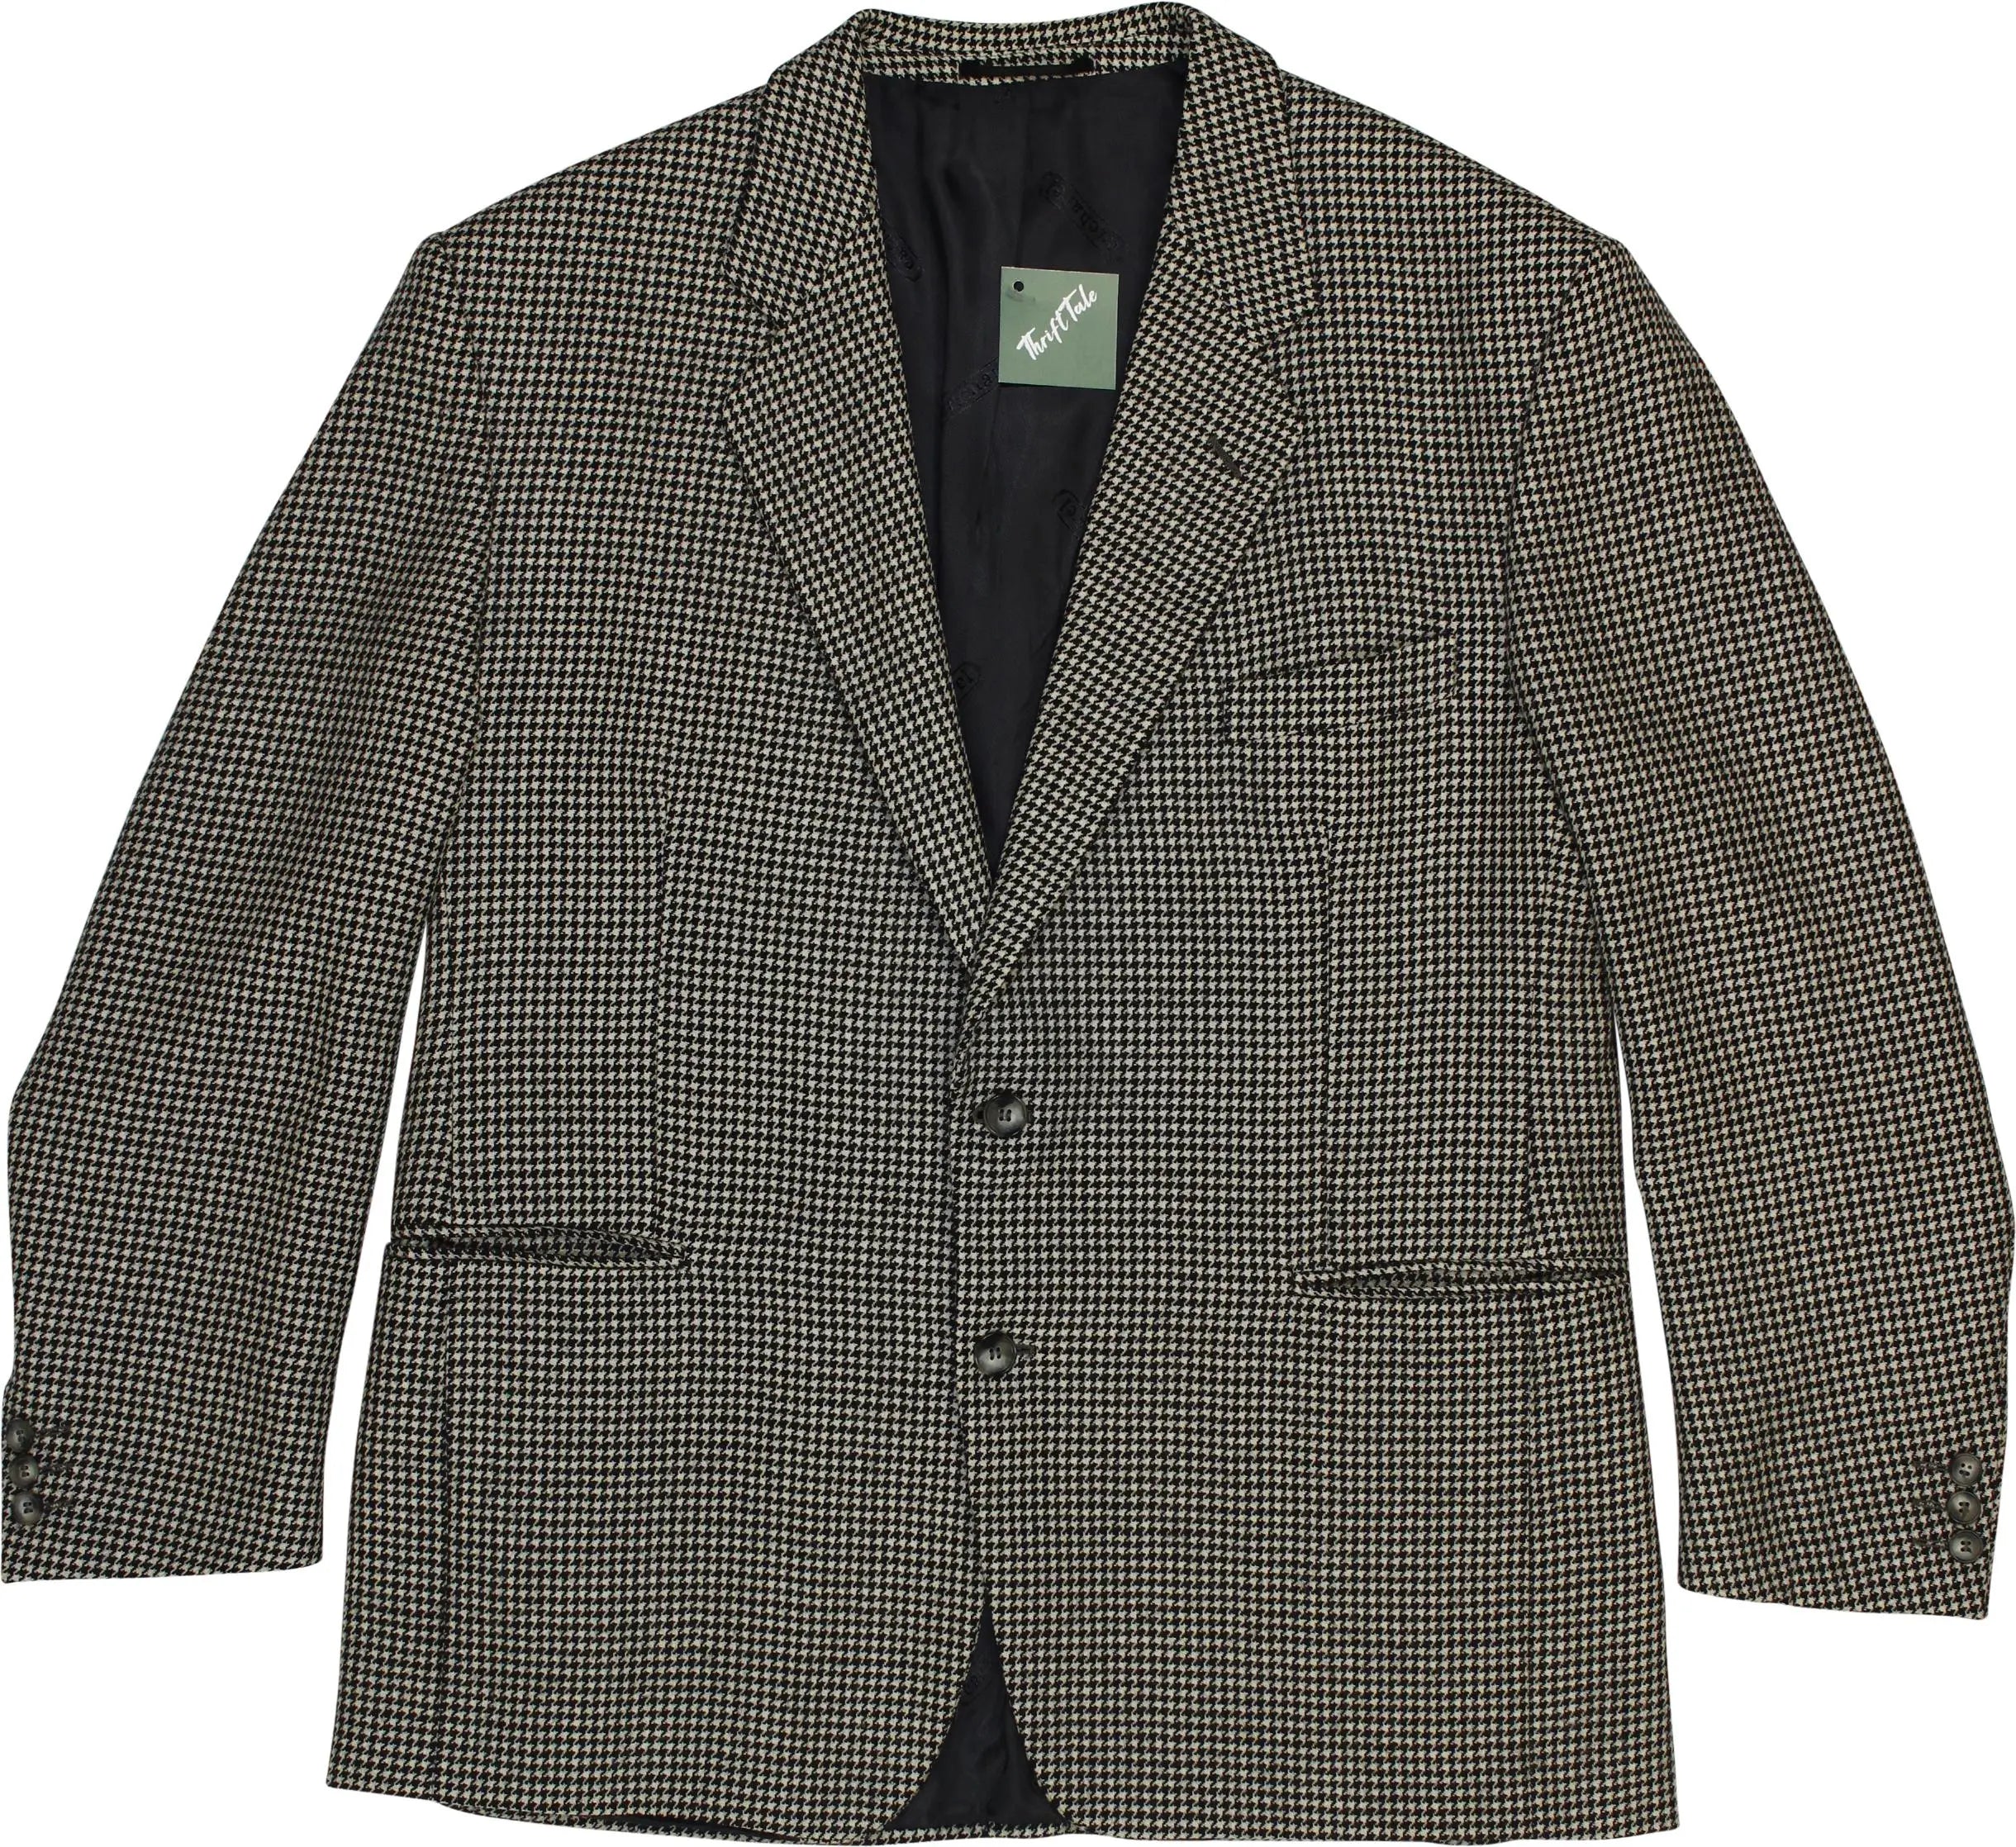 Cacharel - Pied de Poule Blazer by Cacharel- ThriftTale.com - Vintage and second handclothing